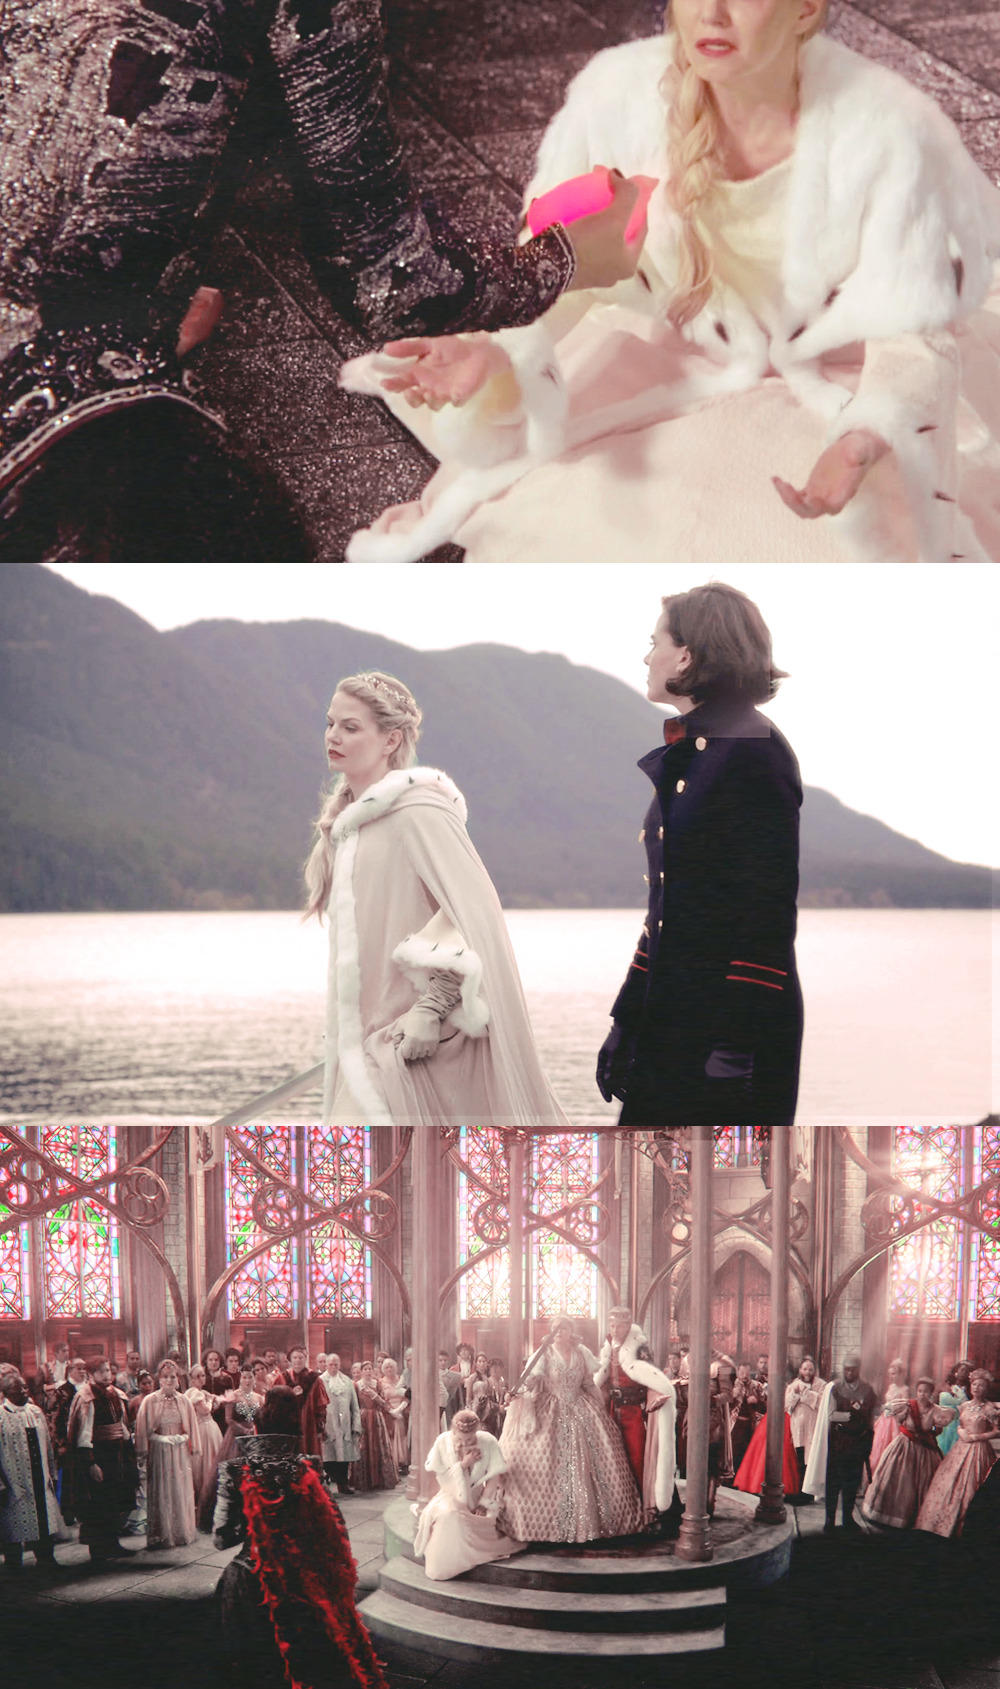 possibilityofmagic: emma, you saved me. yeah well, you came to this crazy world to